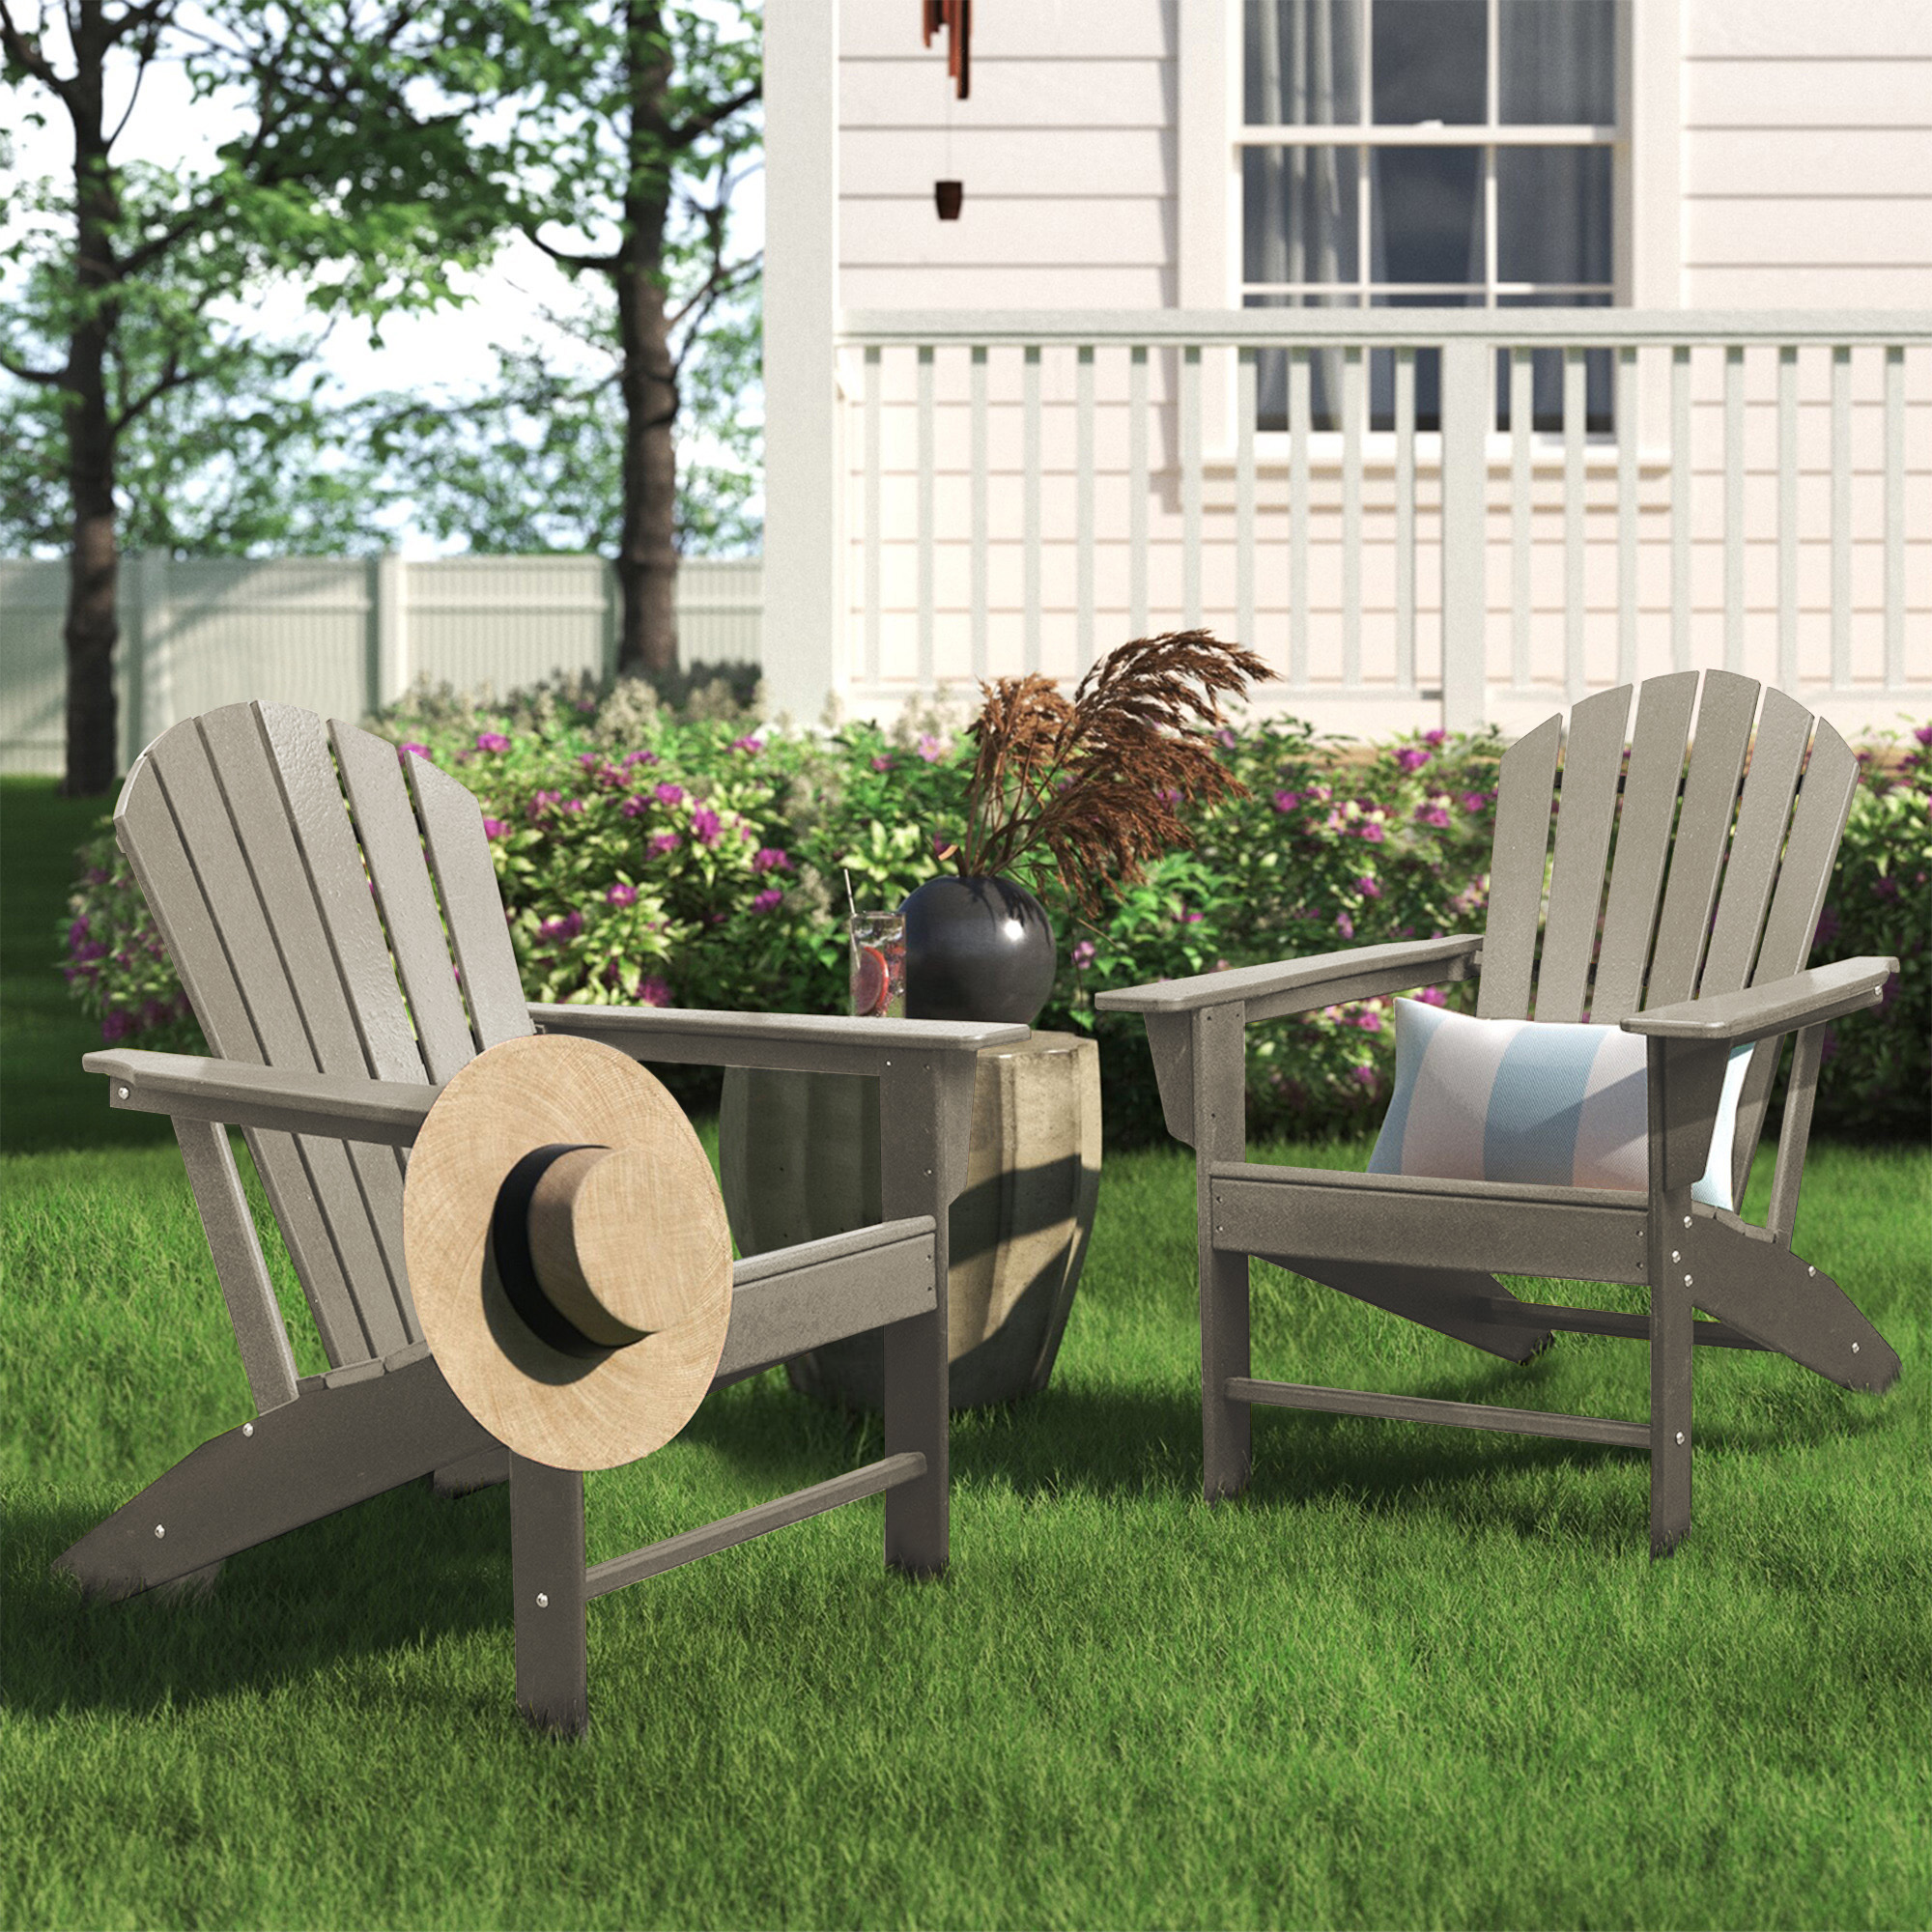 FHFO Outdoor Adirondack Chair,Weather Resistant Plastic Resin Chair for Outside Deck Garden Backyard Balcony(Brown) - image 5 of 6